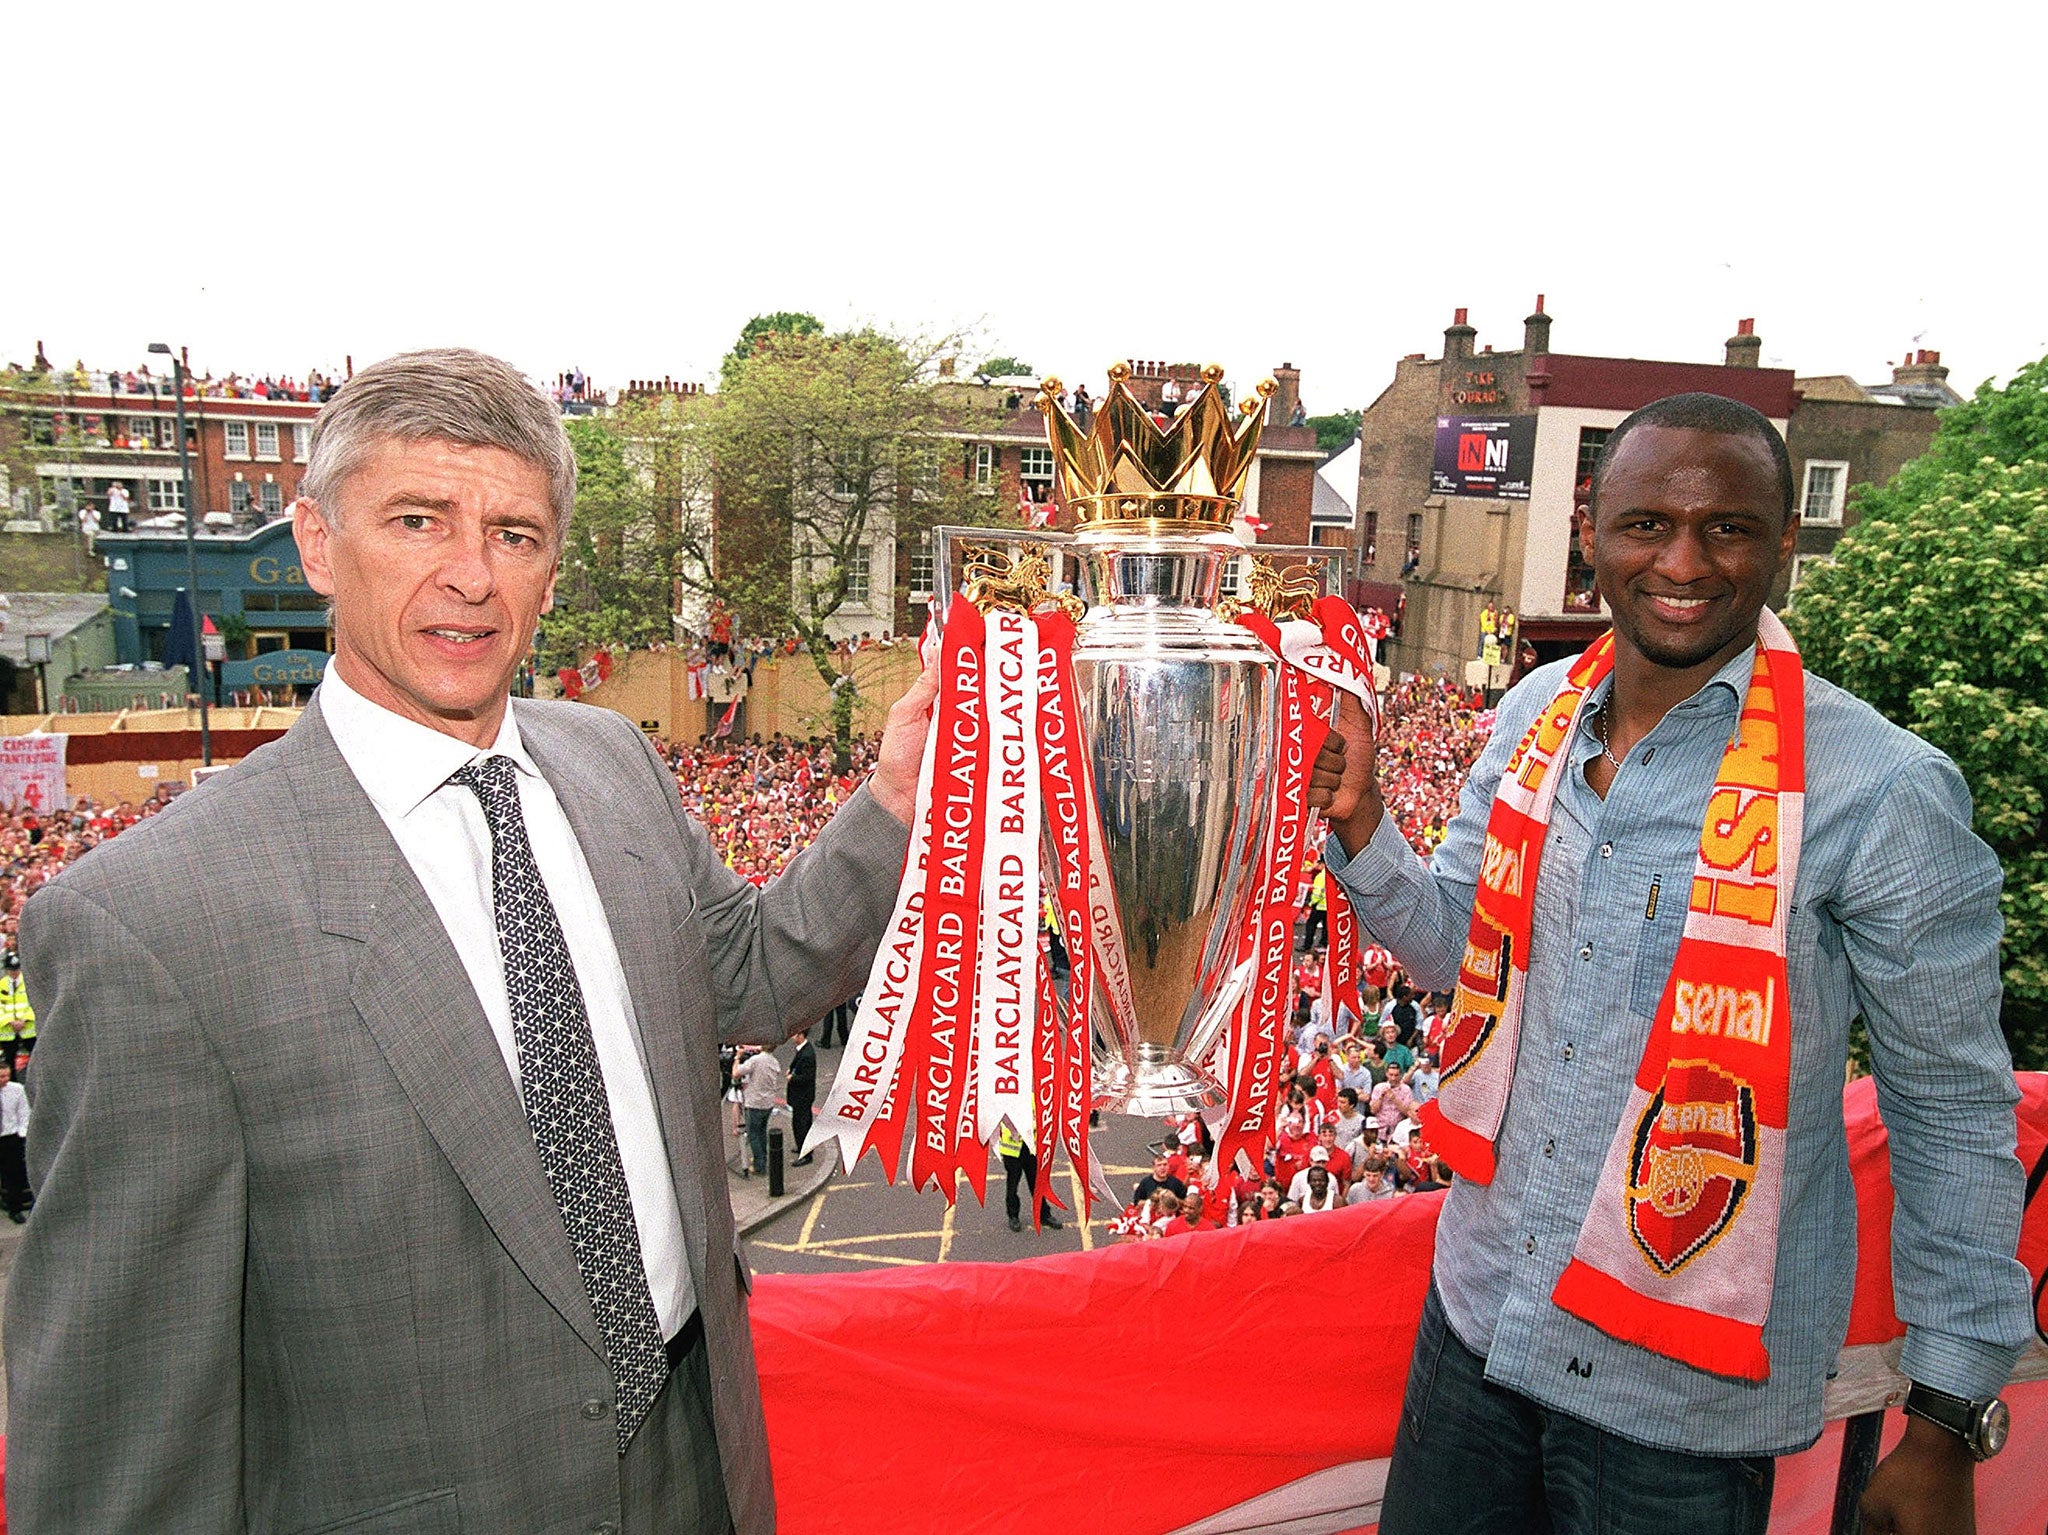 Patrick Vieira with his former manager Arsene Wenger